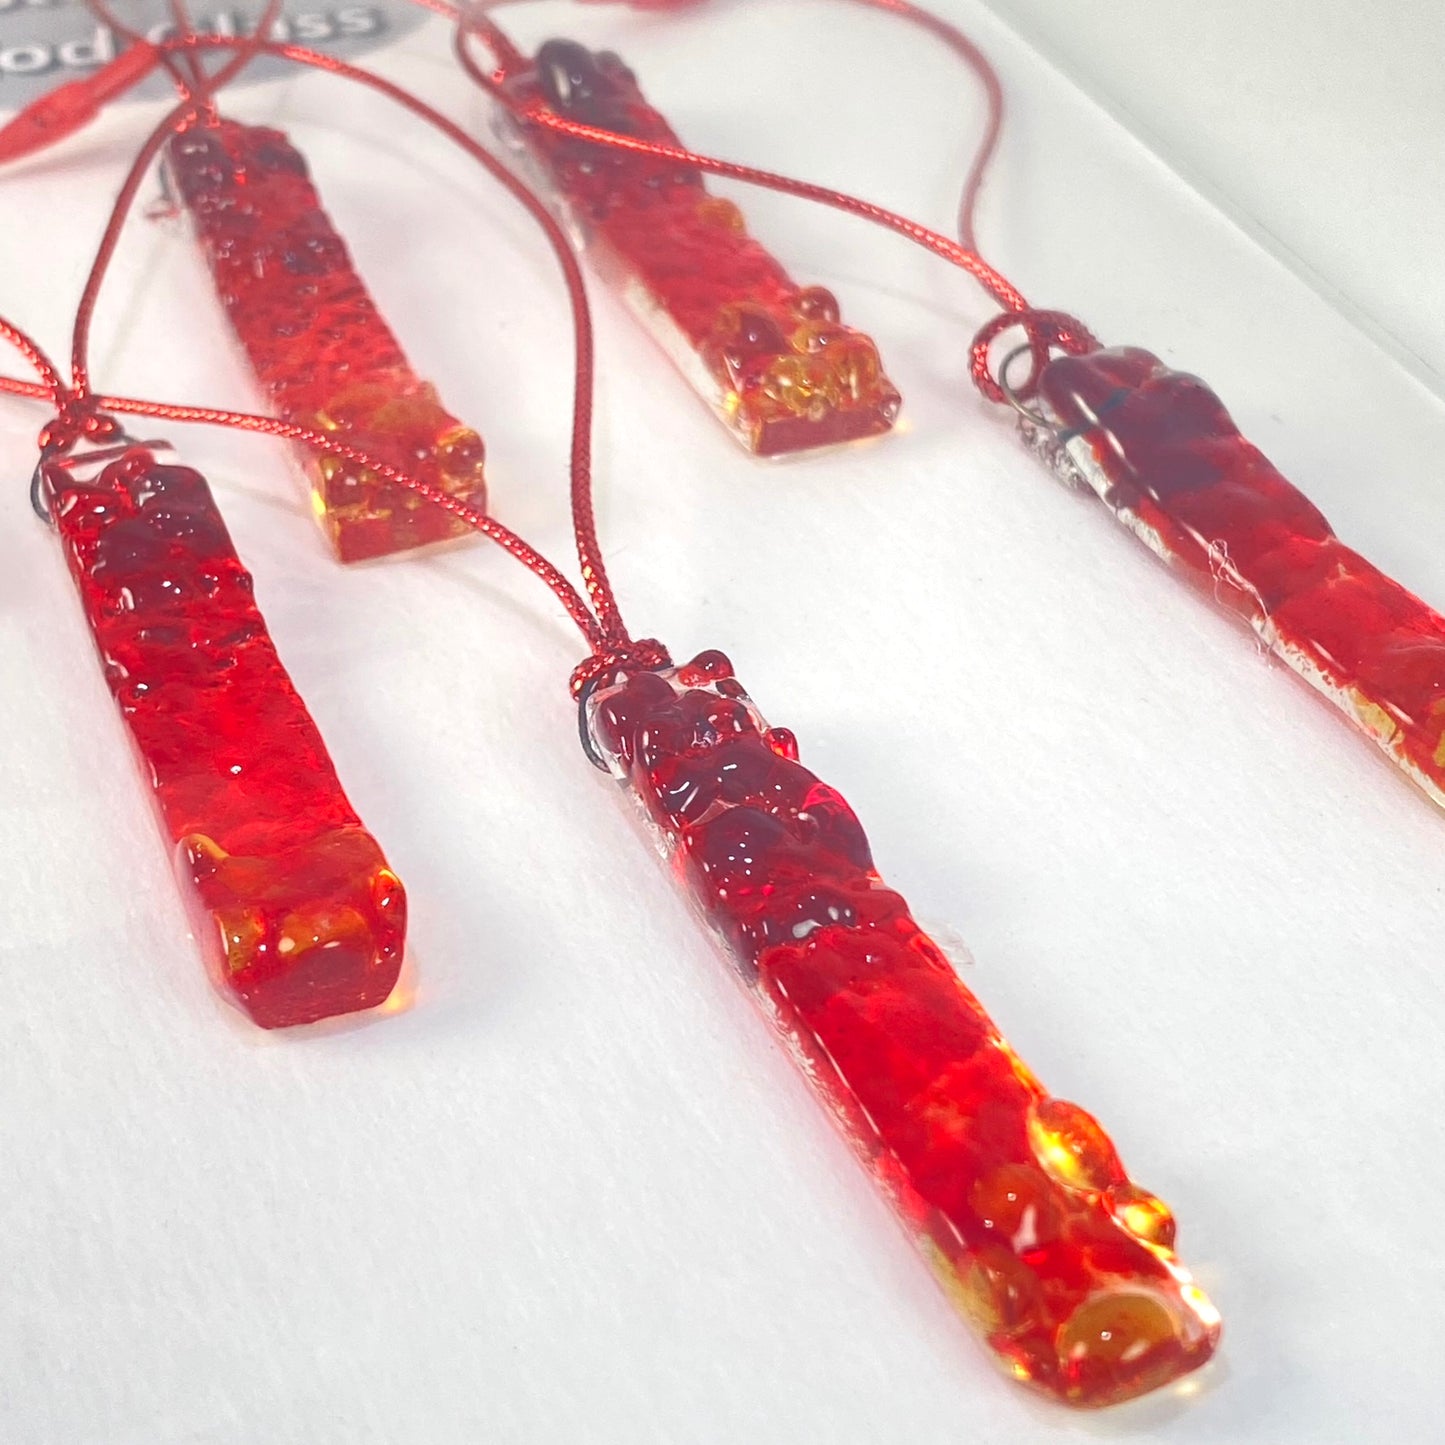 Six (6) Frit RECTANGLE Ornaments in Red & Amber